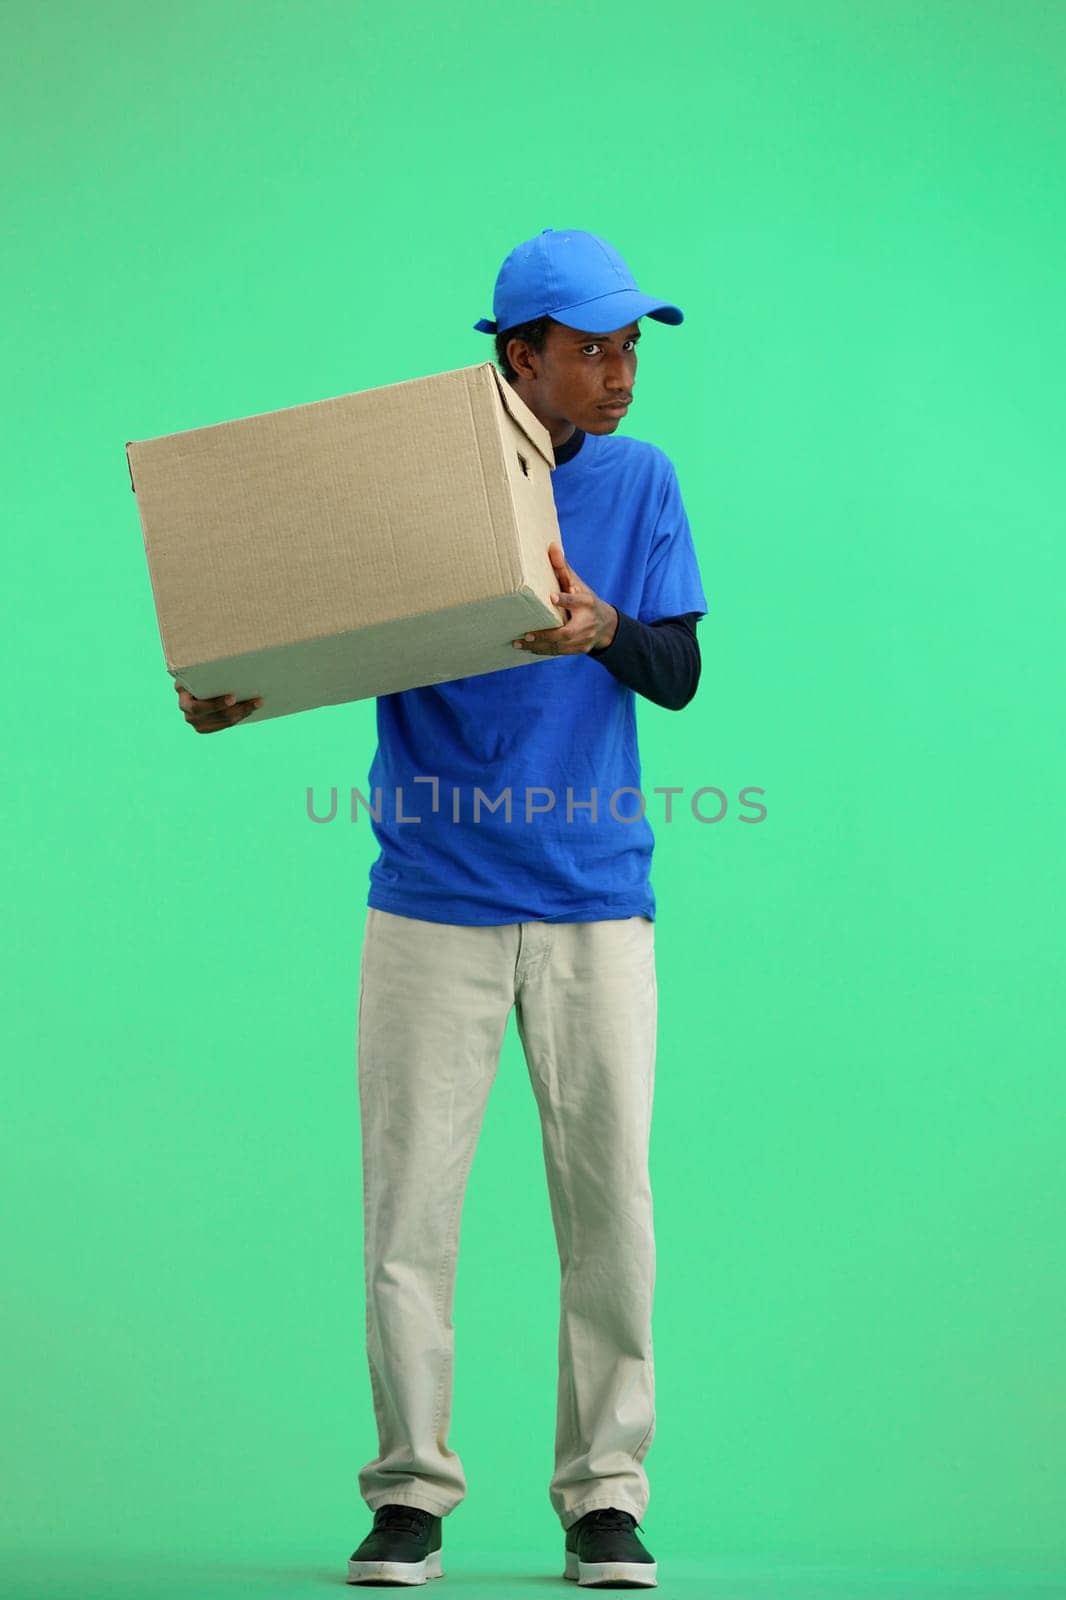 The deliveryman, in full height, on a green background, examines the box by Prosto